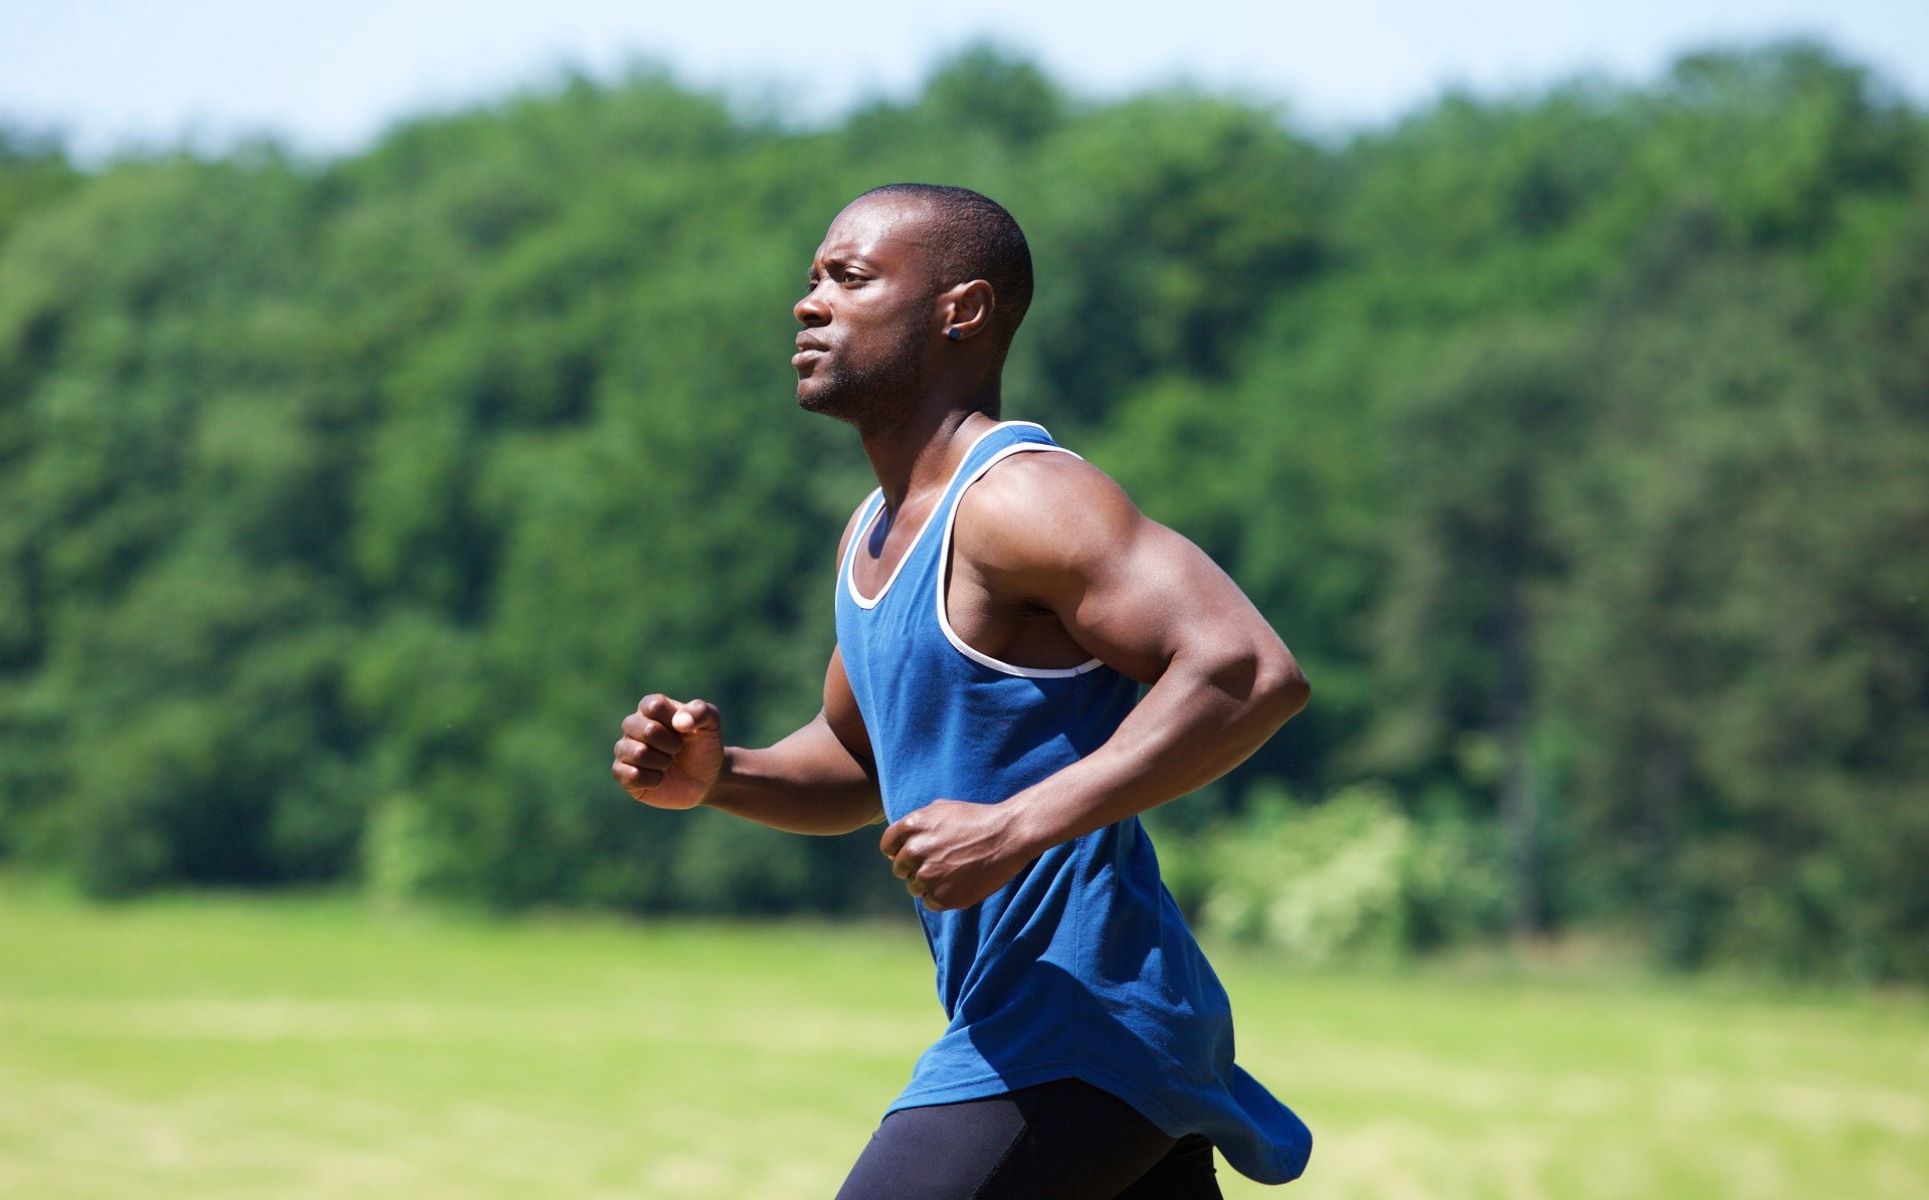 Maximizing Your Running Performance With Brick Sessions